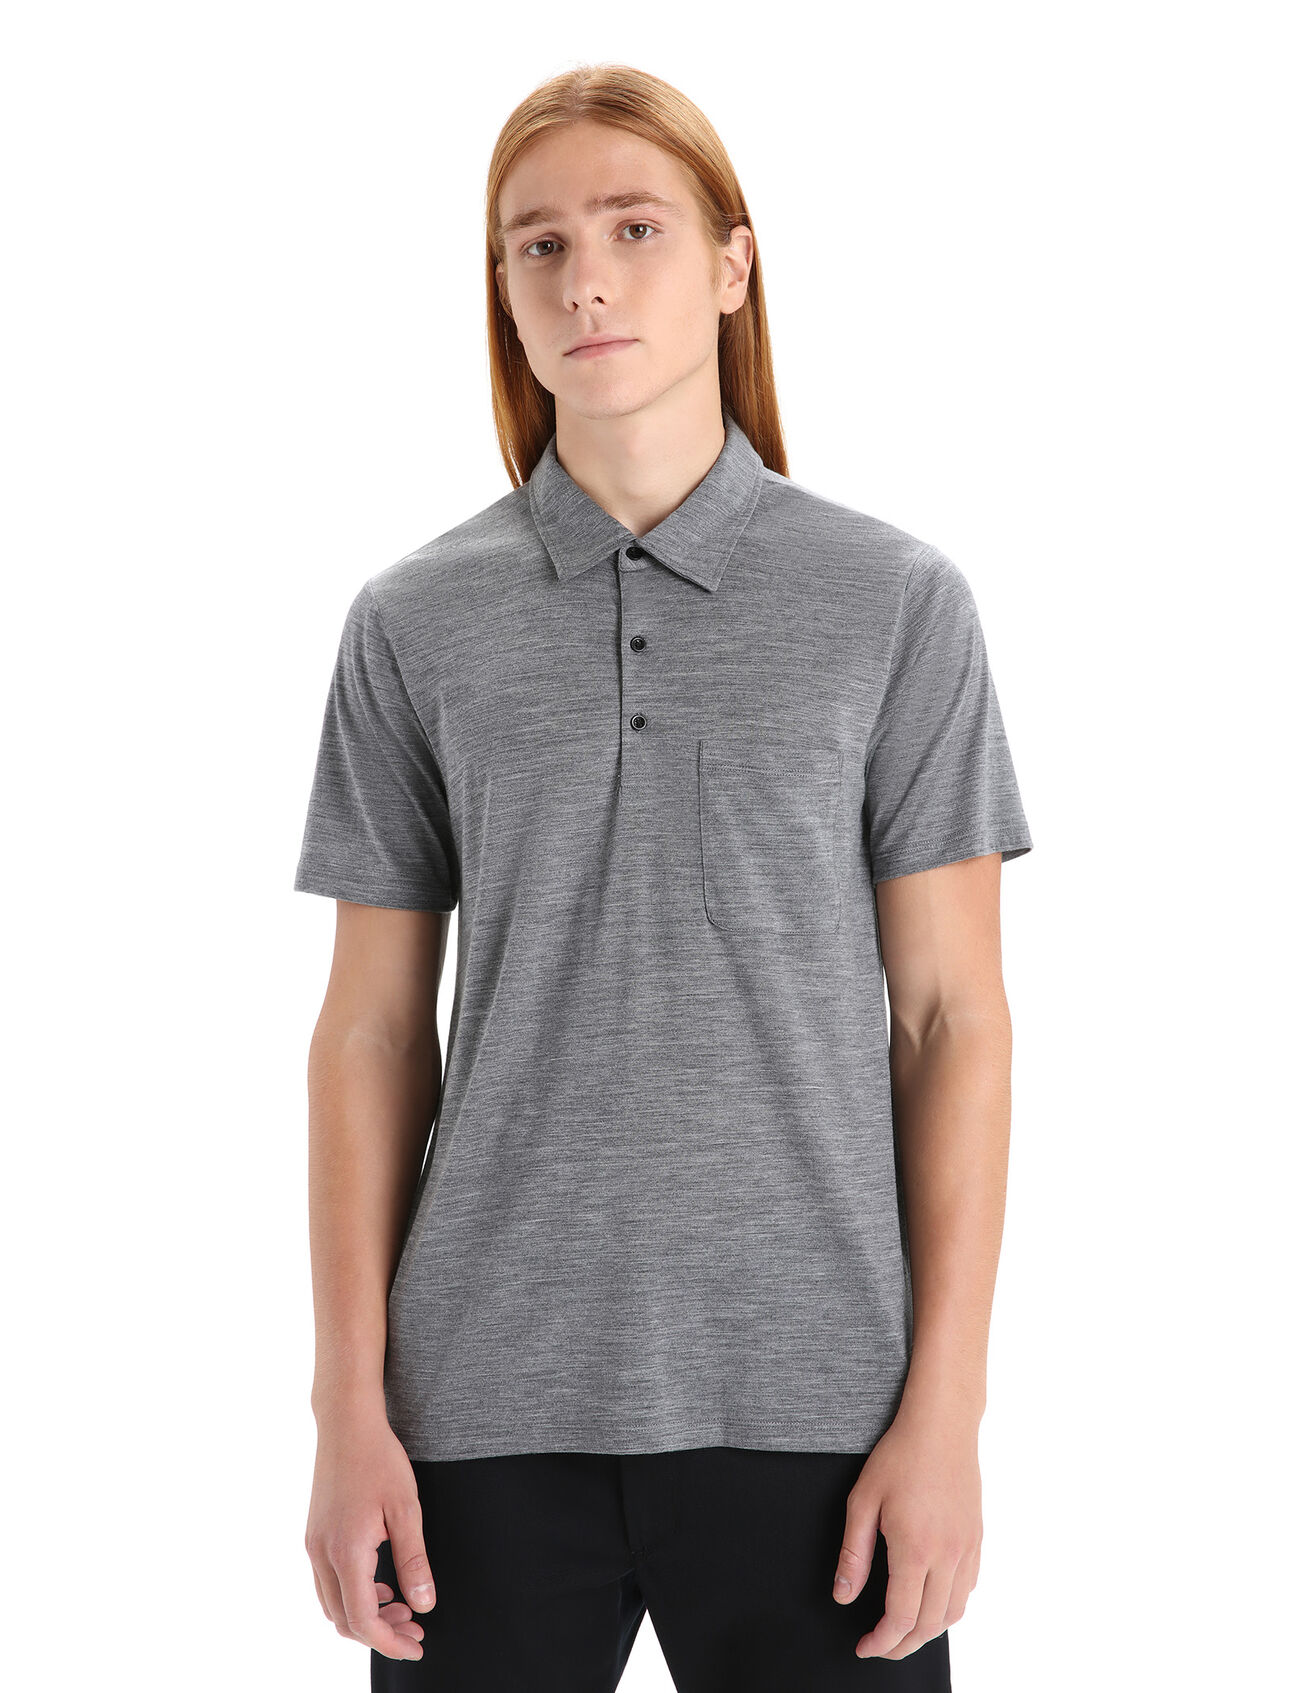 Mens Merino Blend Drayden Polo A classic, stylish polo with everyday versatility and incredible breathability, the Drayden Short Sleeve Polo features our moisture-wicking Cool-Lite™merino jersey fabric.